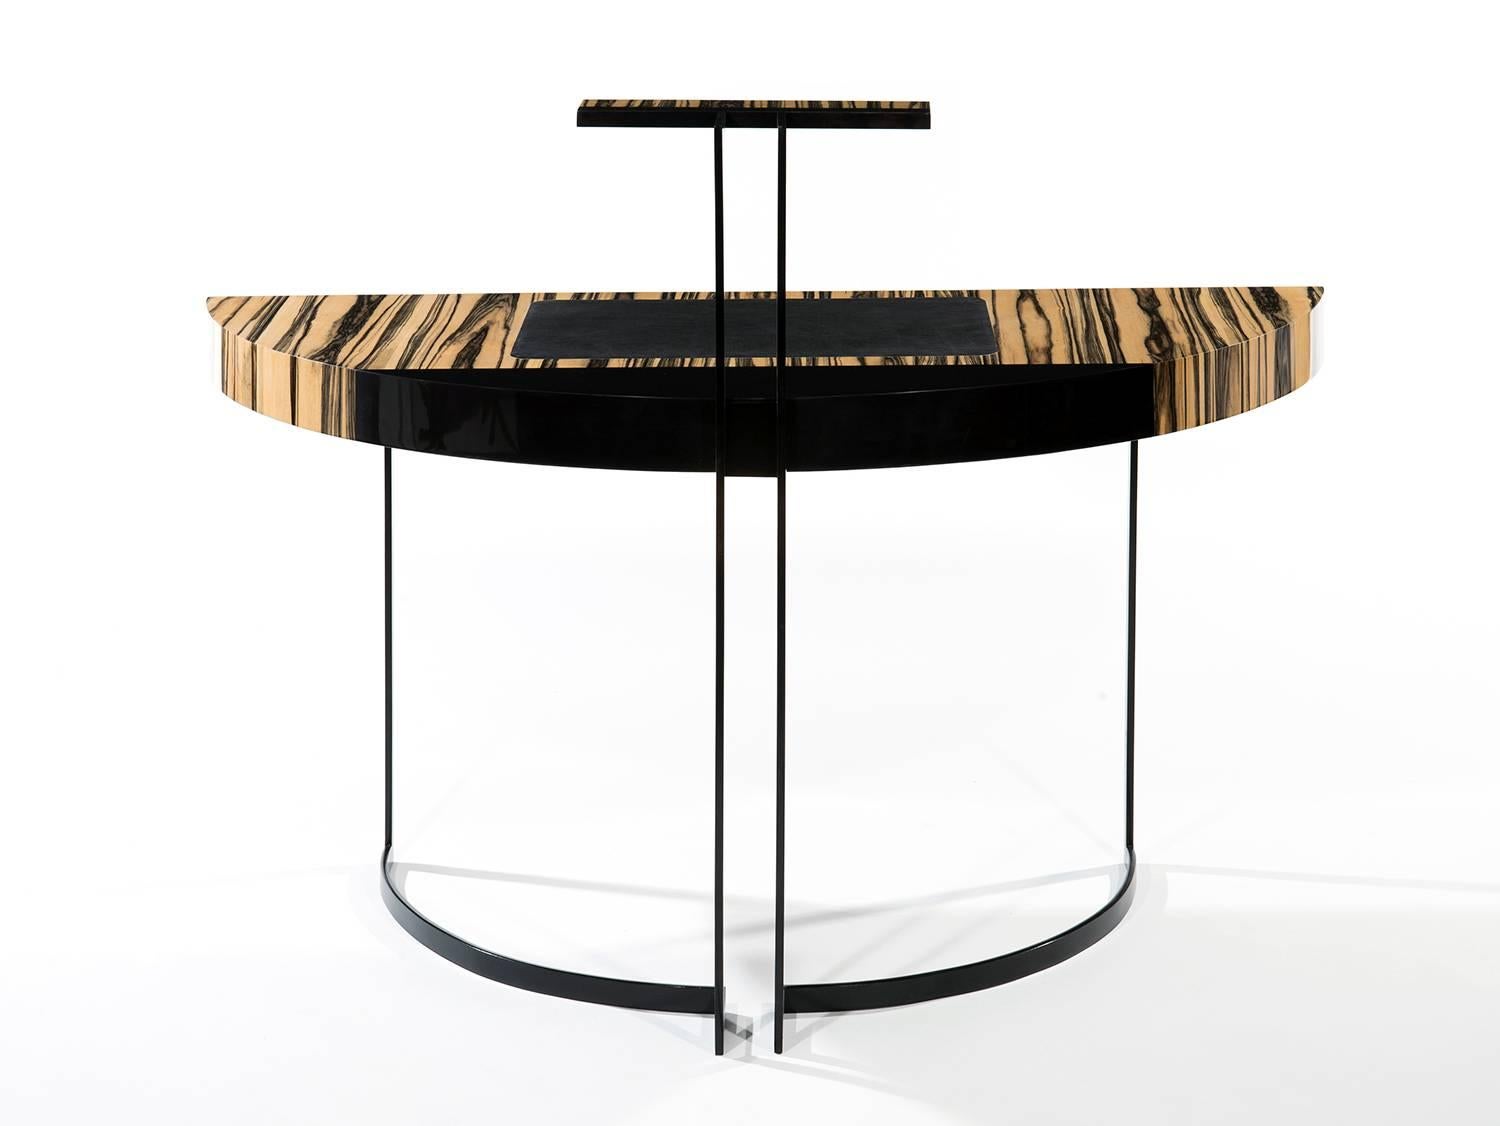 A semicircular black lacquered metal legged desk with a white ebony veneer top and black leather desk blotter. The top of the back legs ends with a led light.

Aymeric Lefort (b. France 1971)
Lefort's decision to become a designer was inspired by